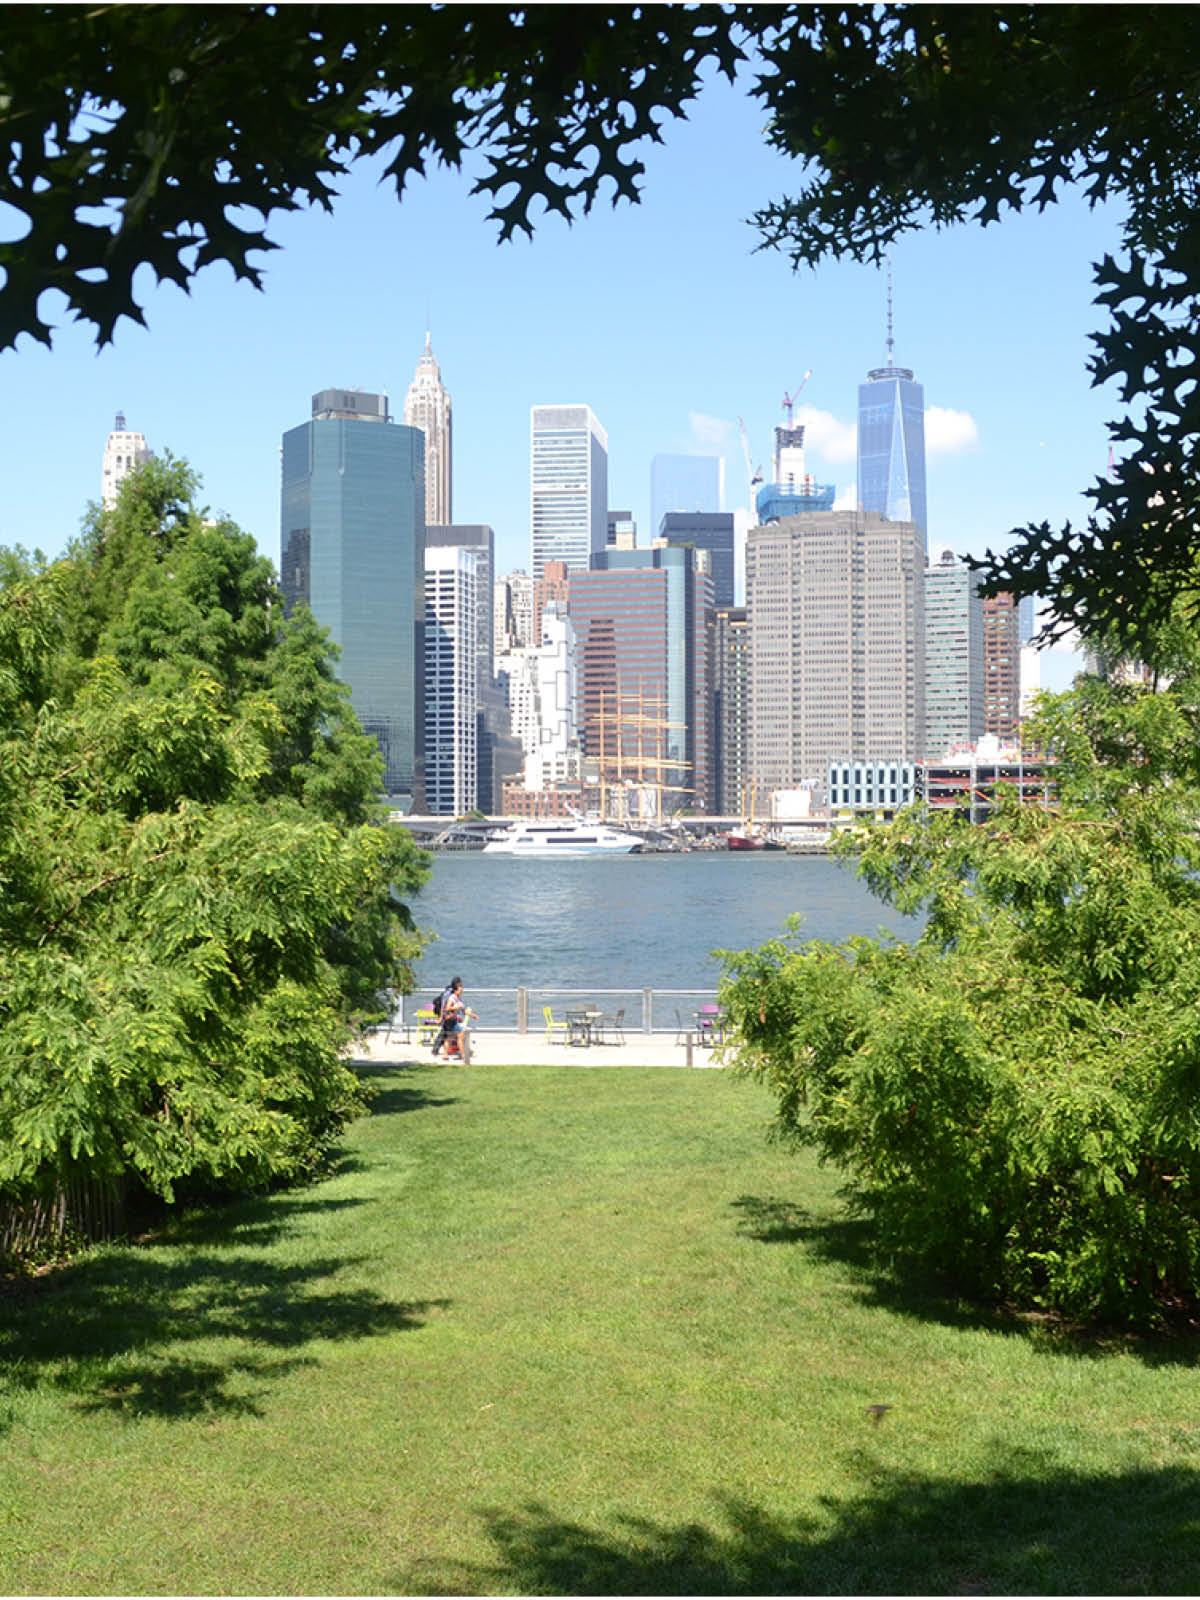 Pier 1 Lawn with a view of the promenade and lower Manhattan on a sunny day.